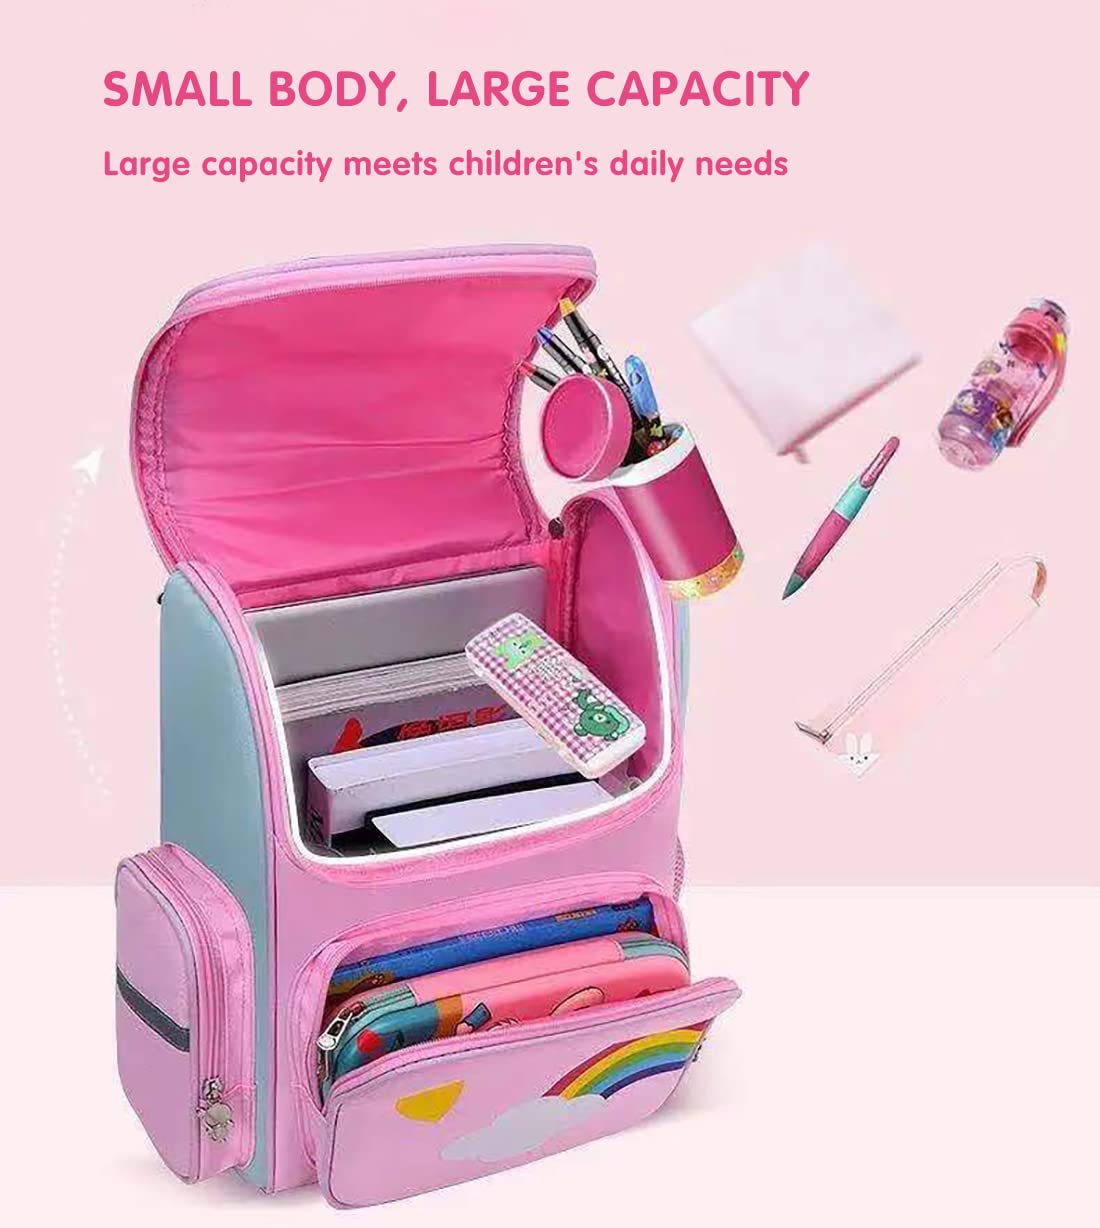 School Backpack for Girls Large Capacity Waterproof Light Weight Schoolbag Bookbag for Kids Primary School Student (Magic Horse Pink)